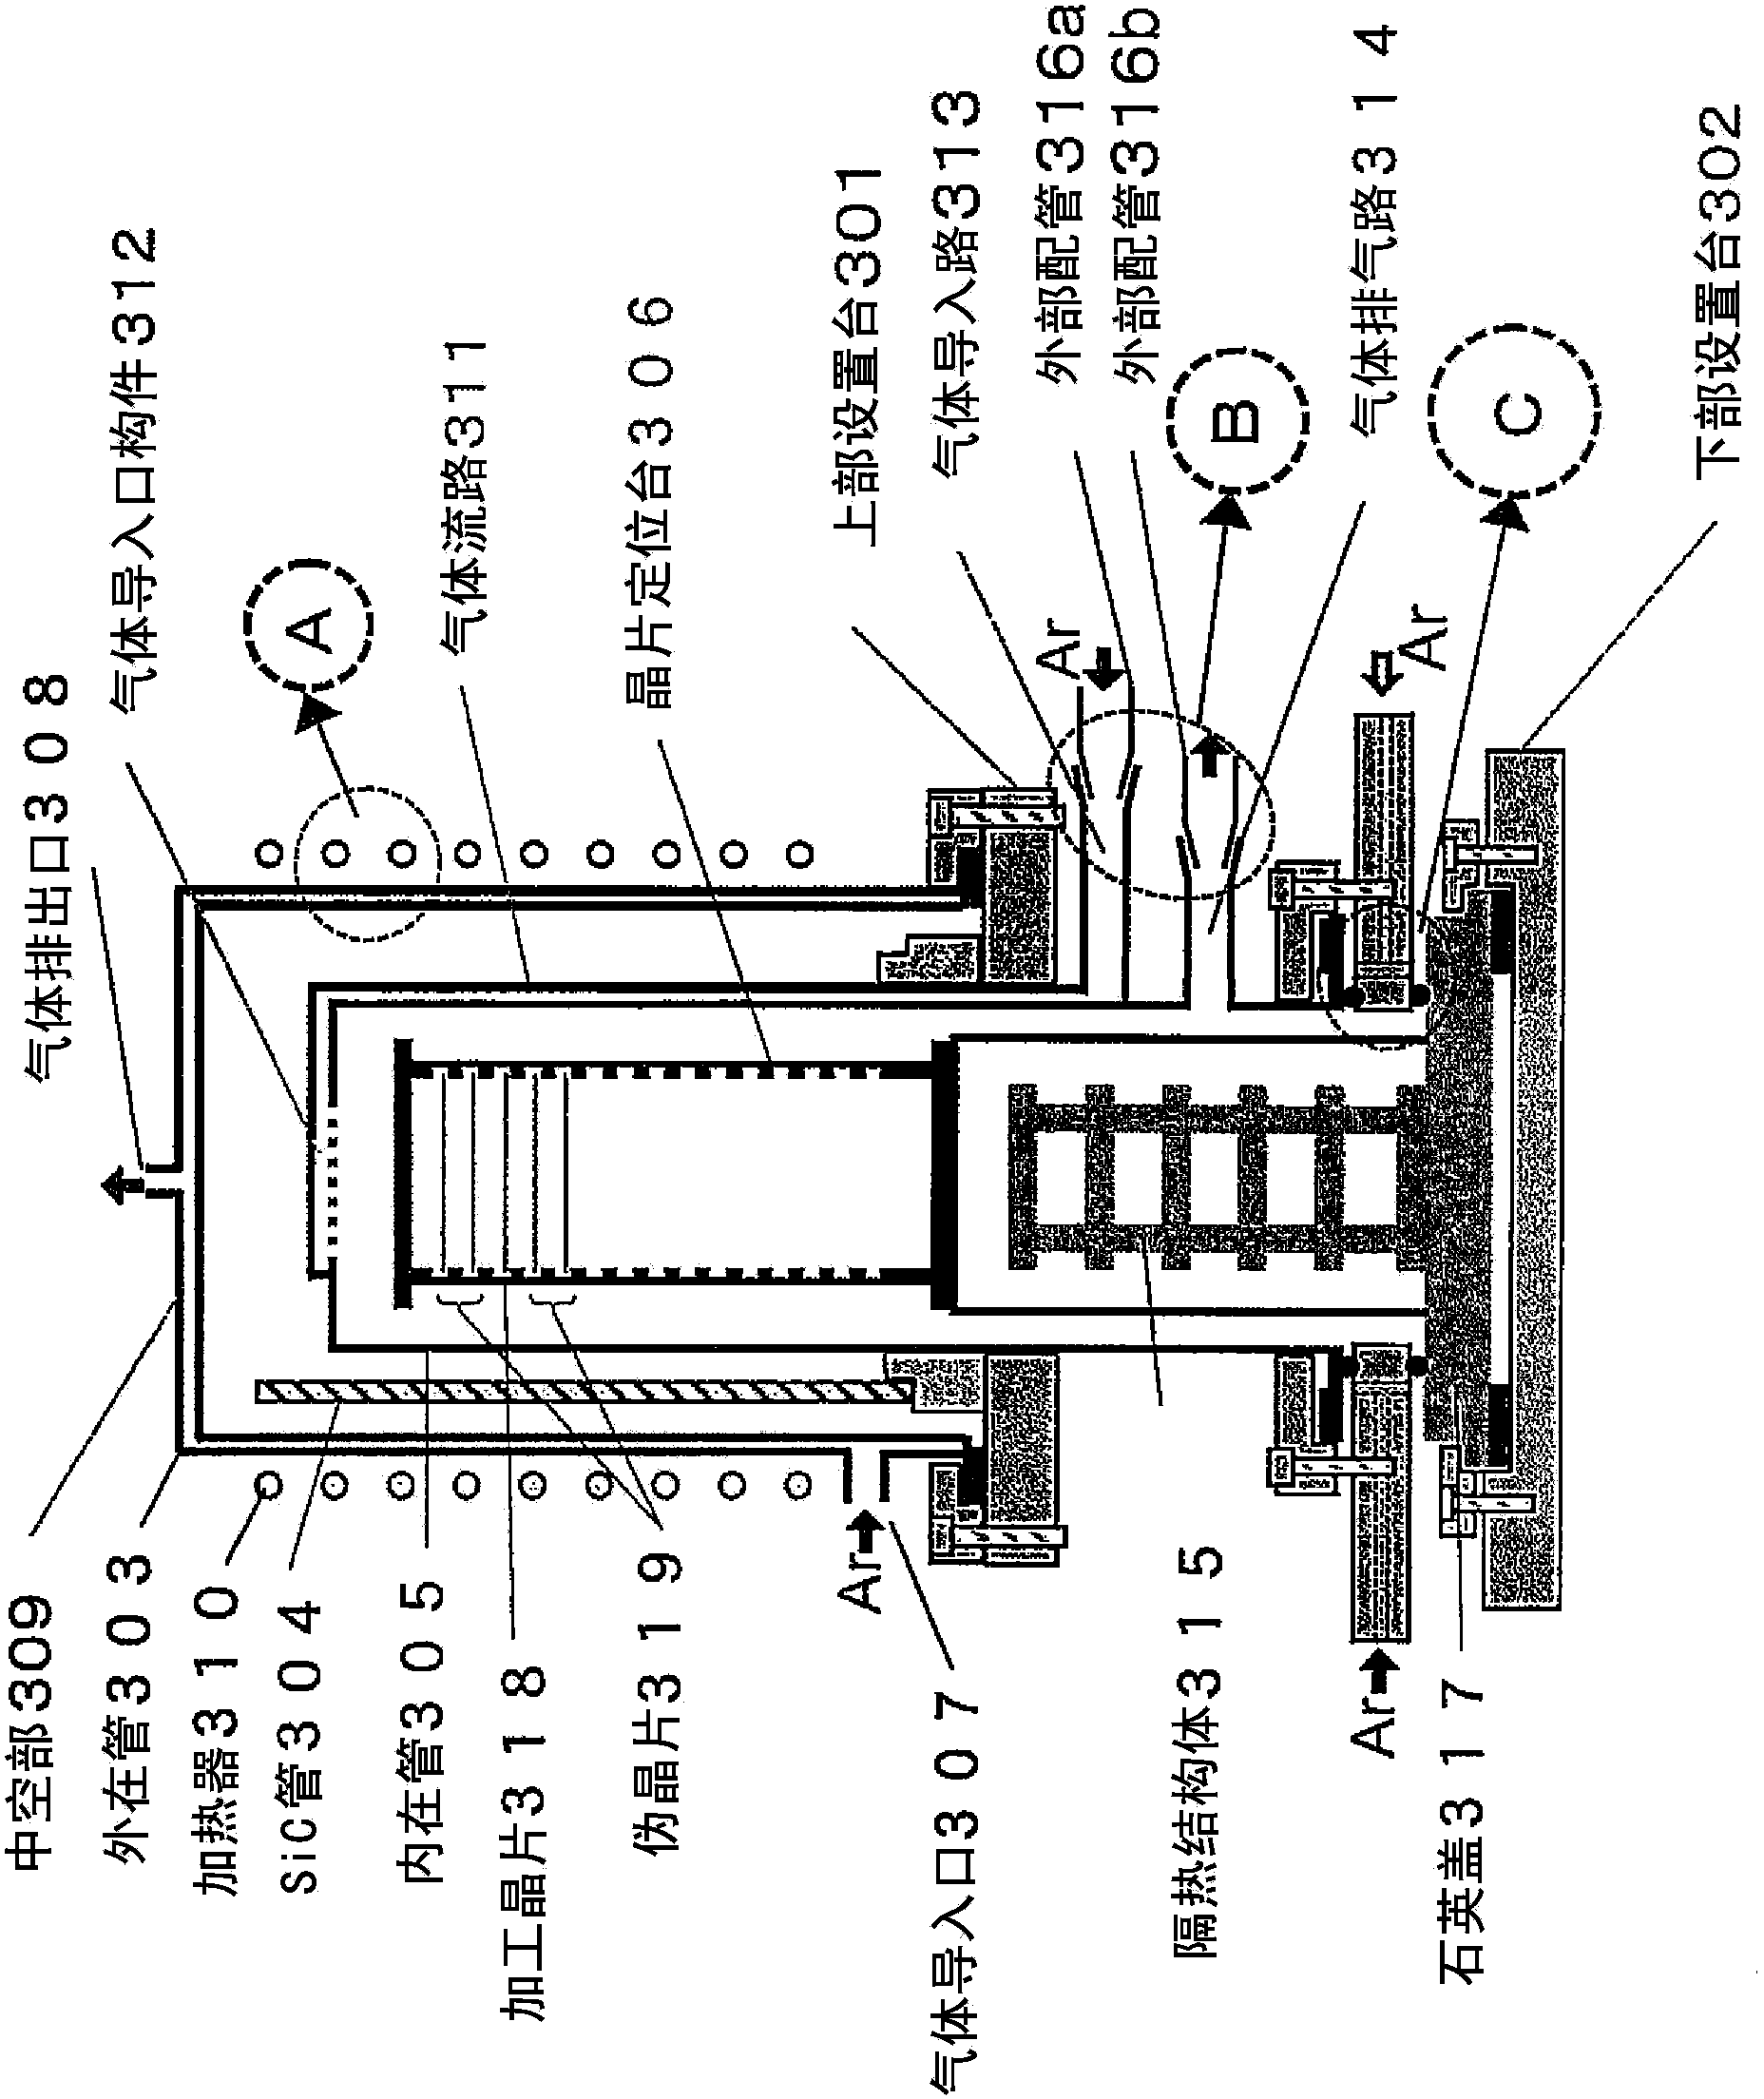 Atomic-order flat surface treatment method of silicon wafer, and heat treatment device